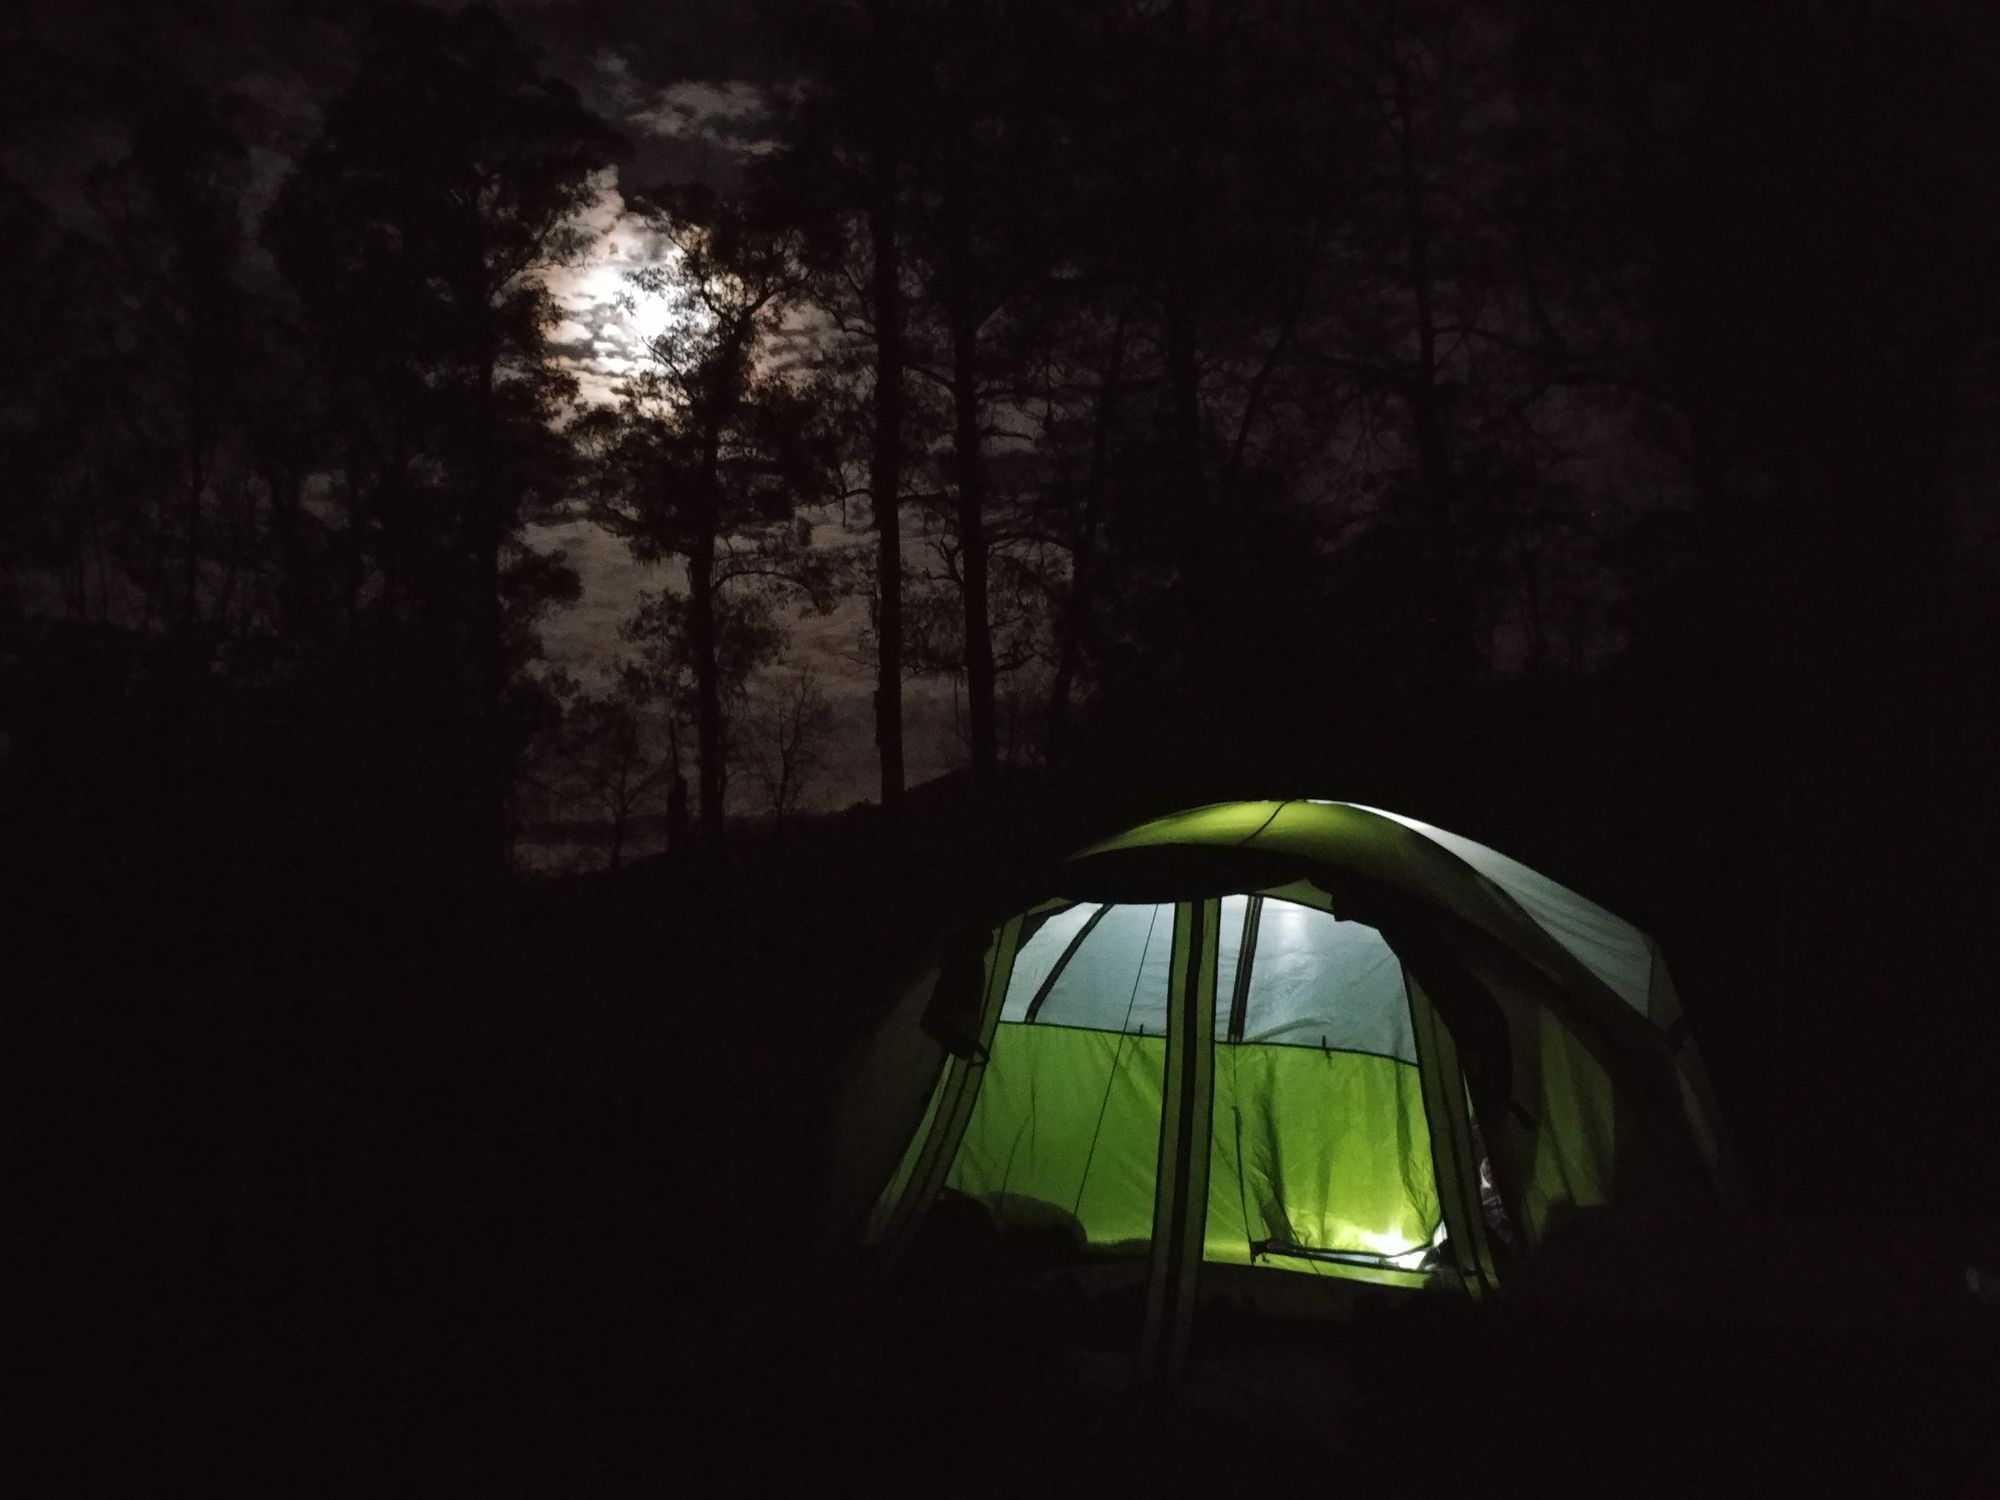 A light shines in a green tent. The full moon is high in the night sky. There are sihouettes of gum trees. 